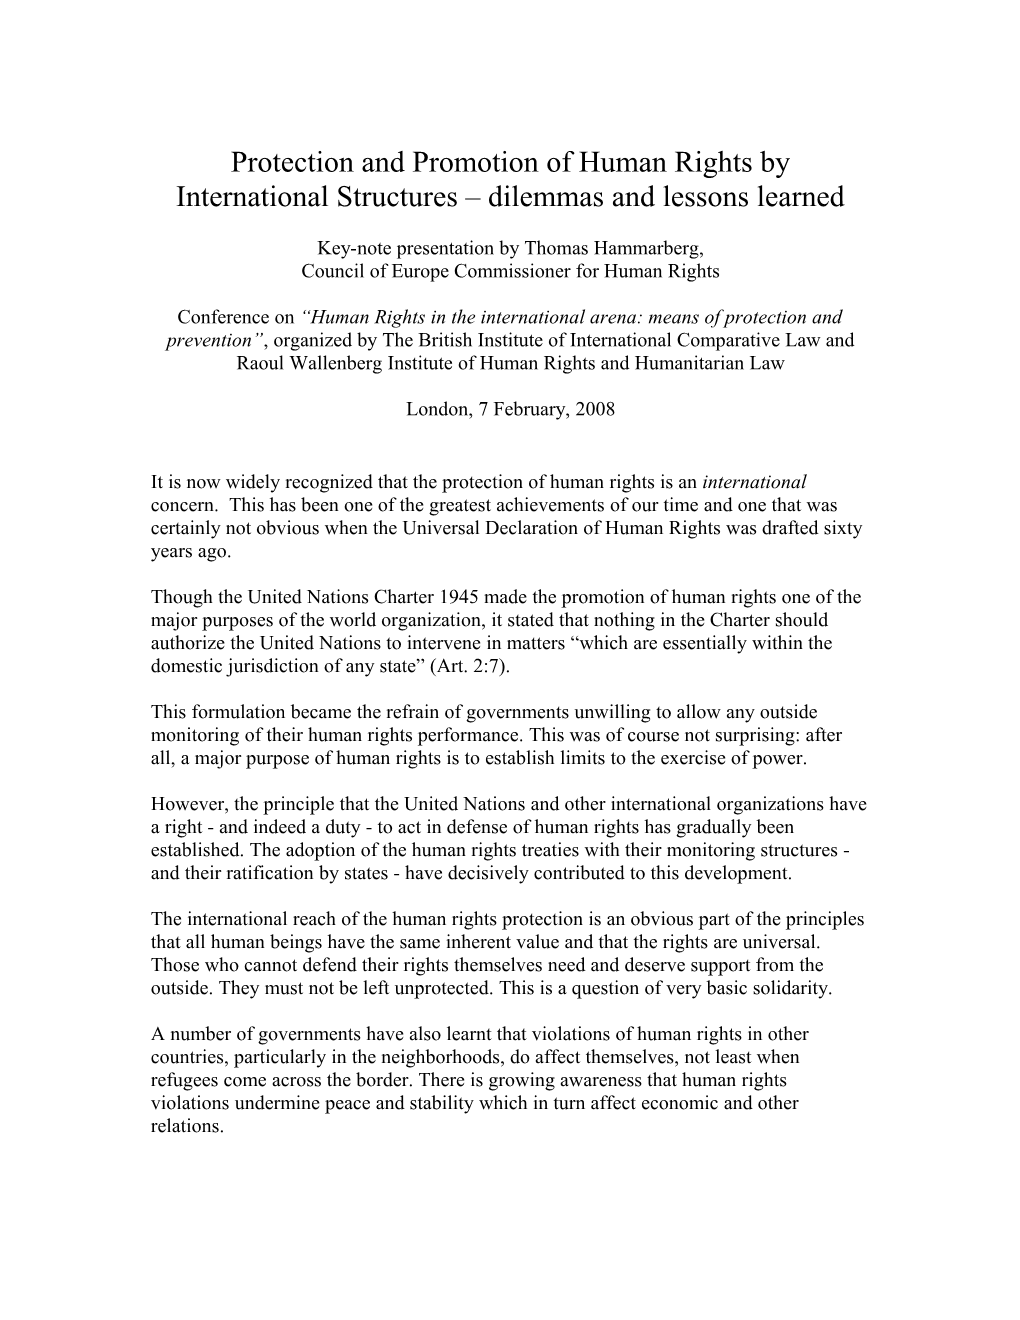 Protection and Promotion of Human Rights by International Bodies Dilemmas and Lessons Learned